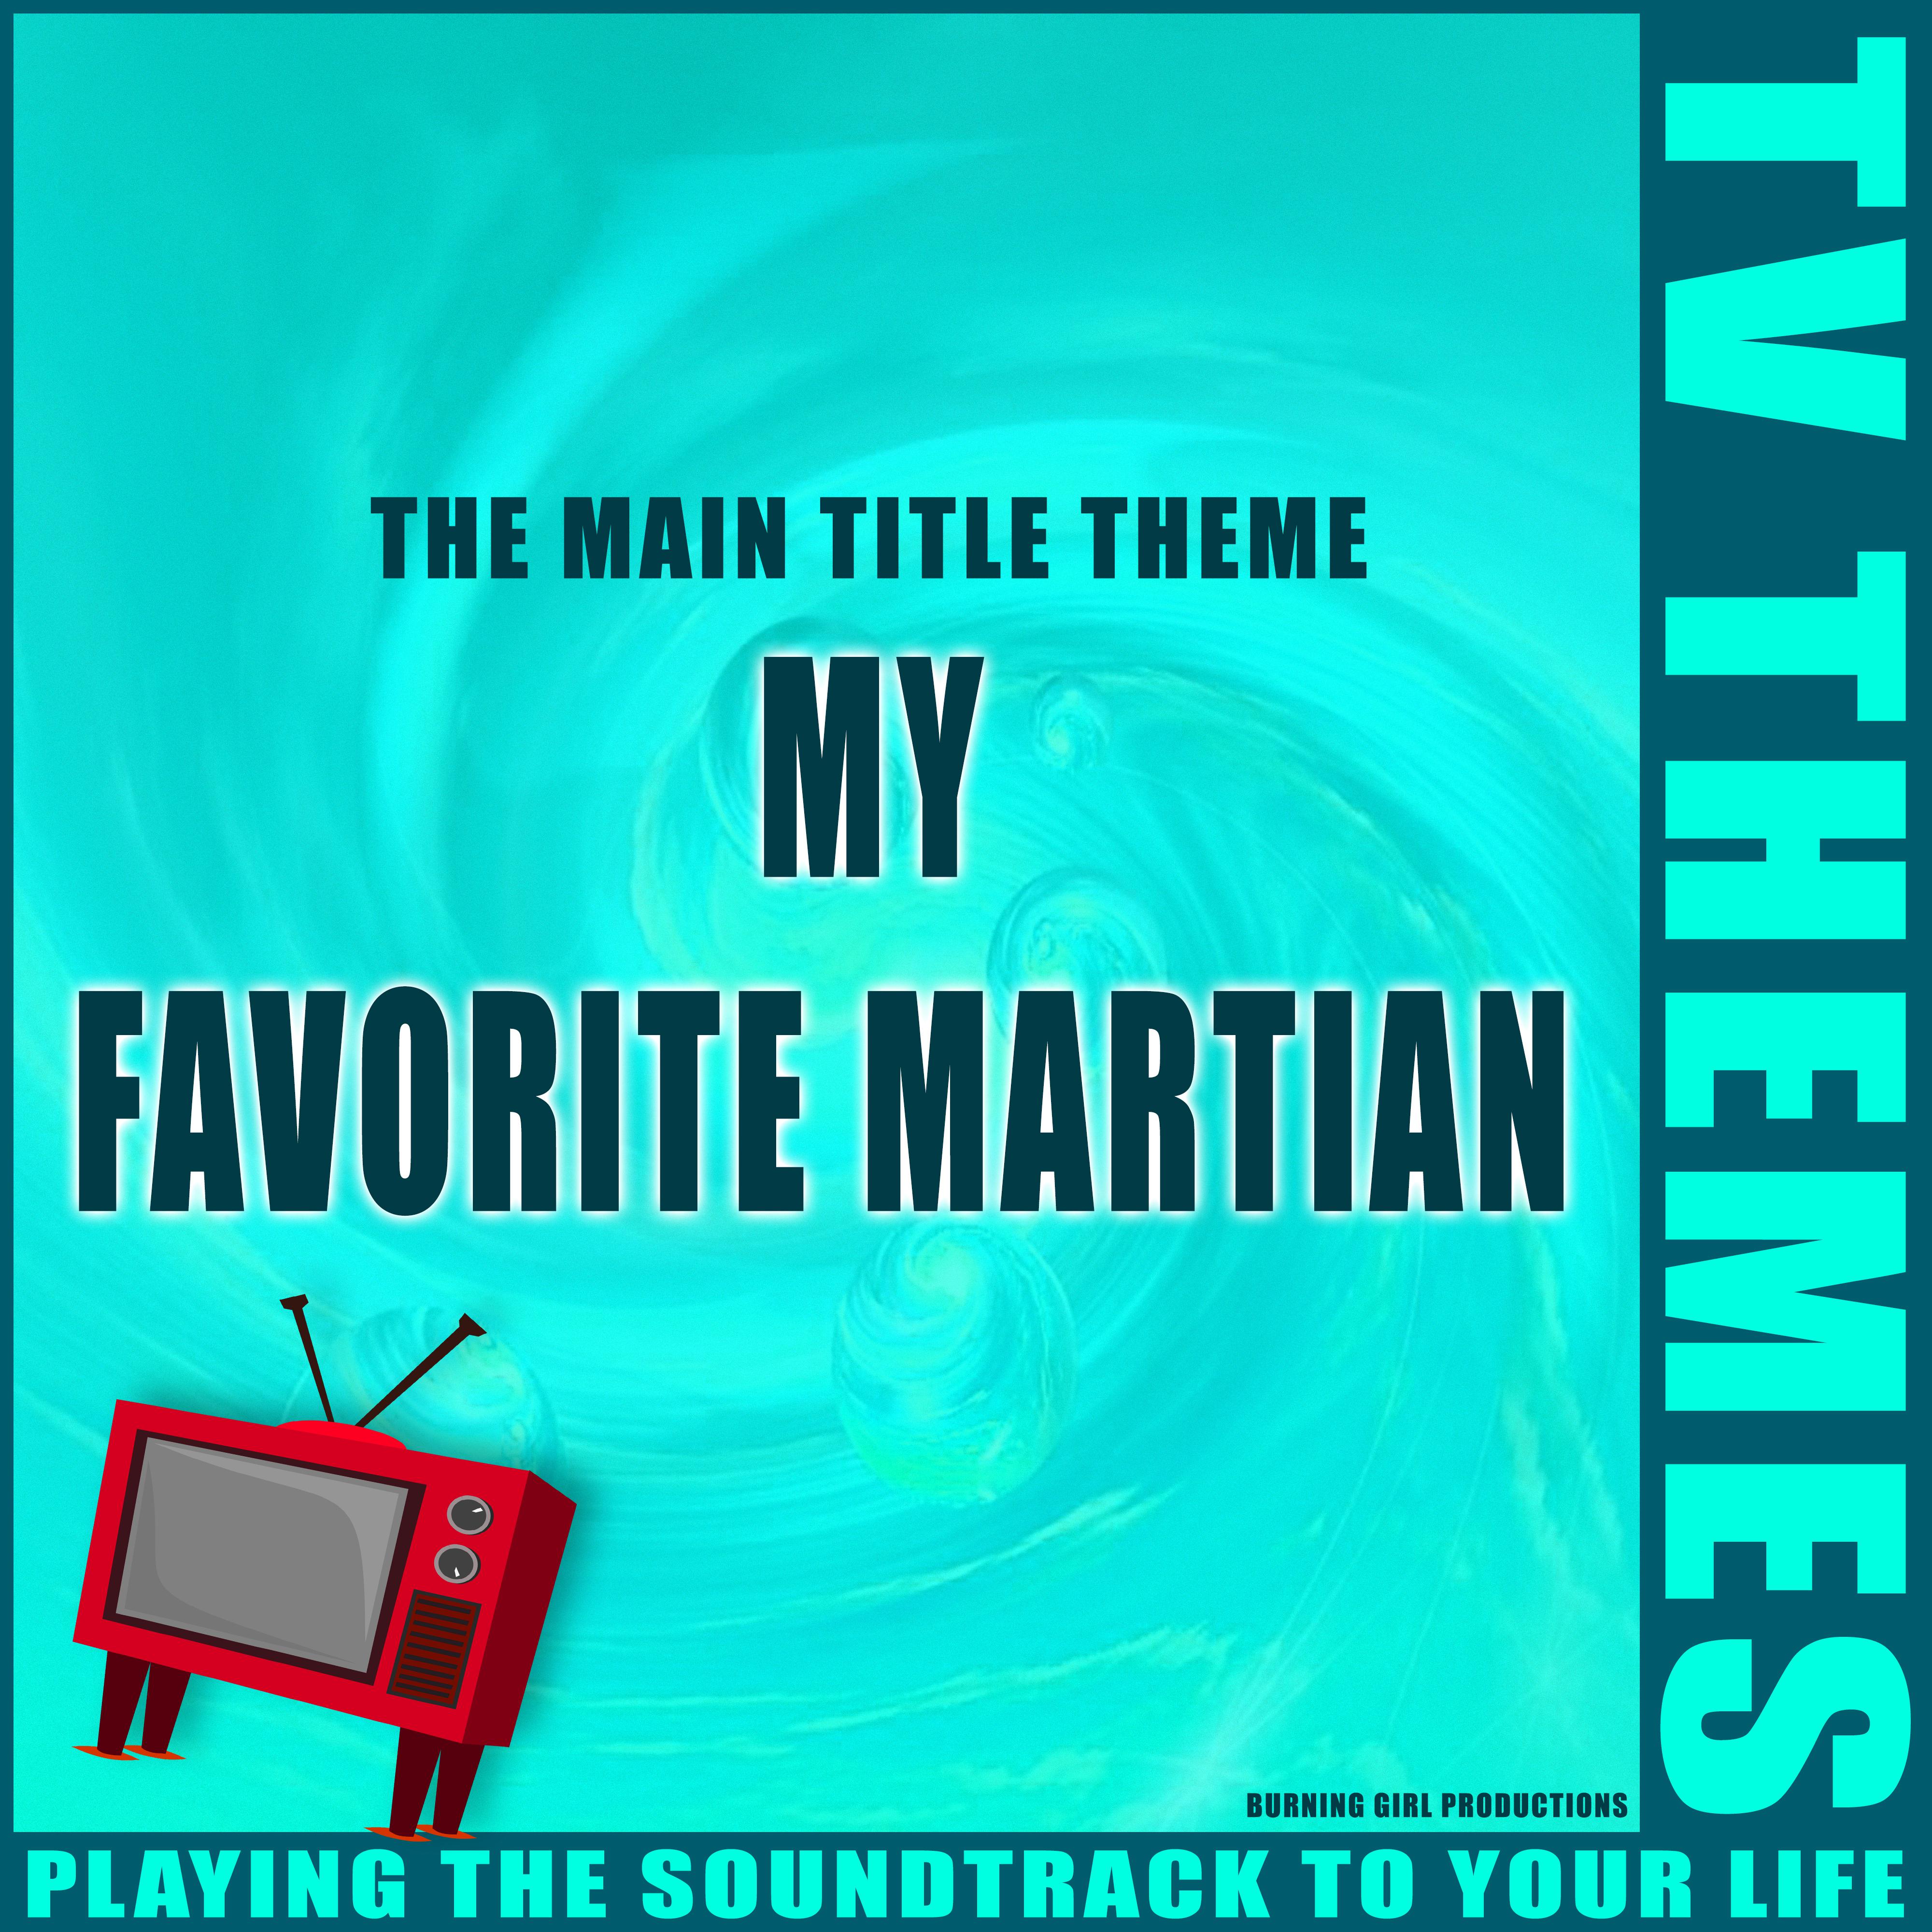 My Favorite Martian - The Main Title Theme